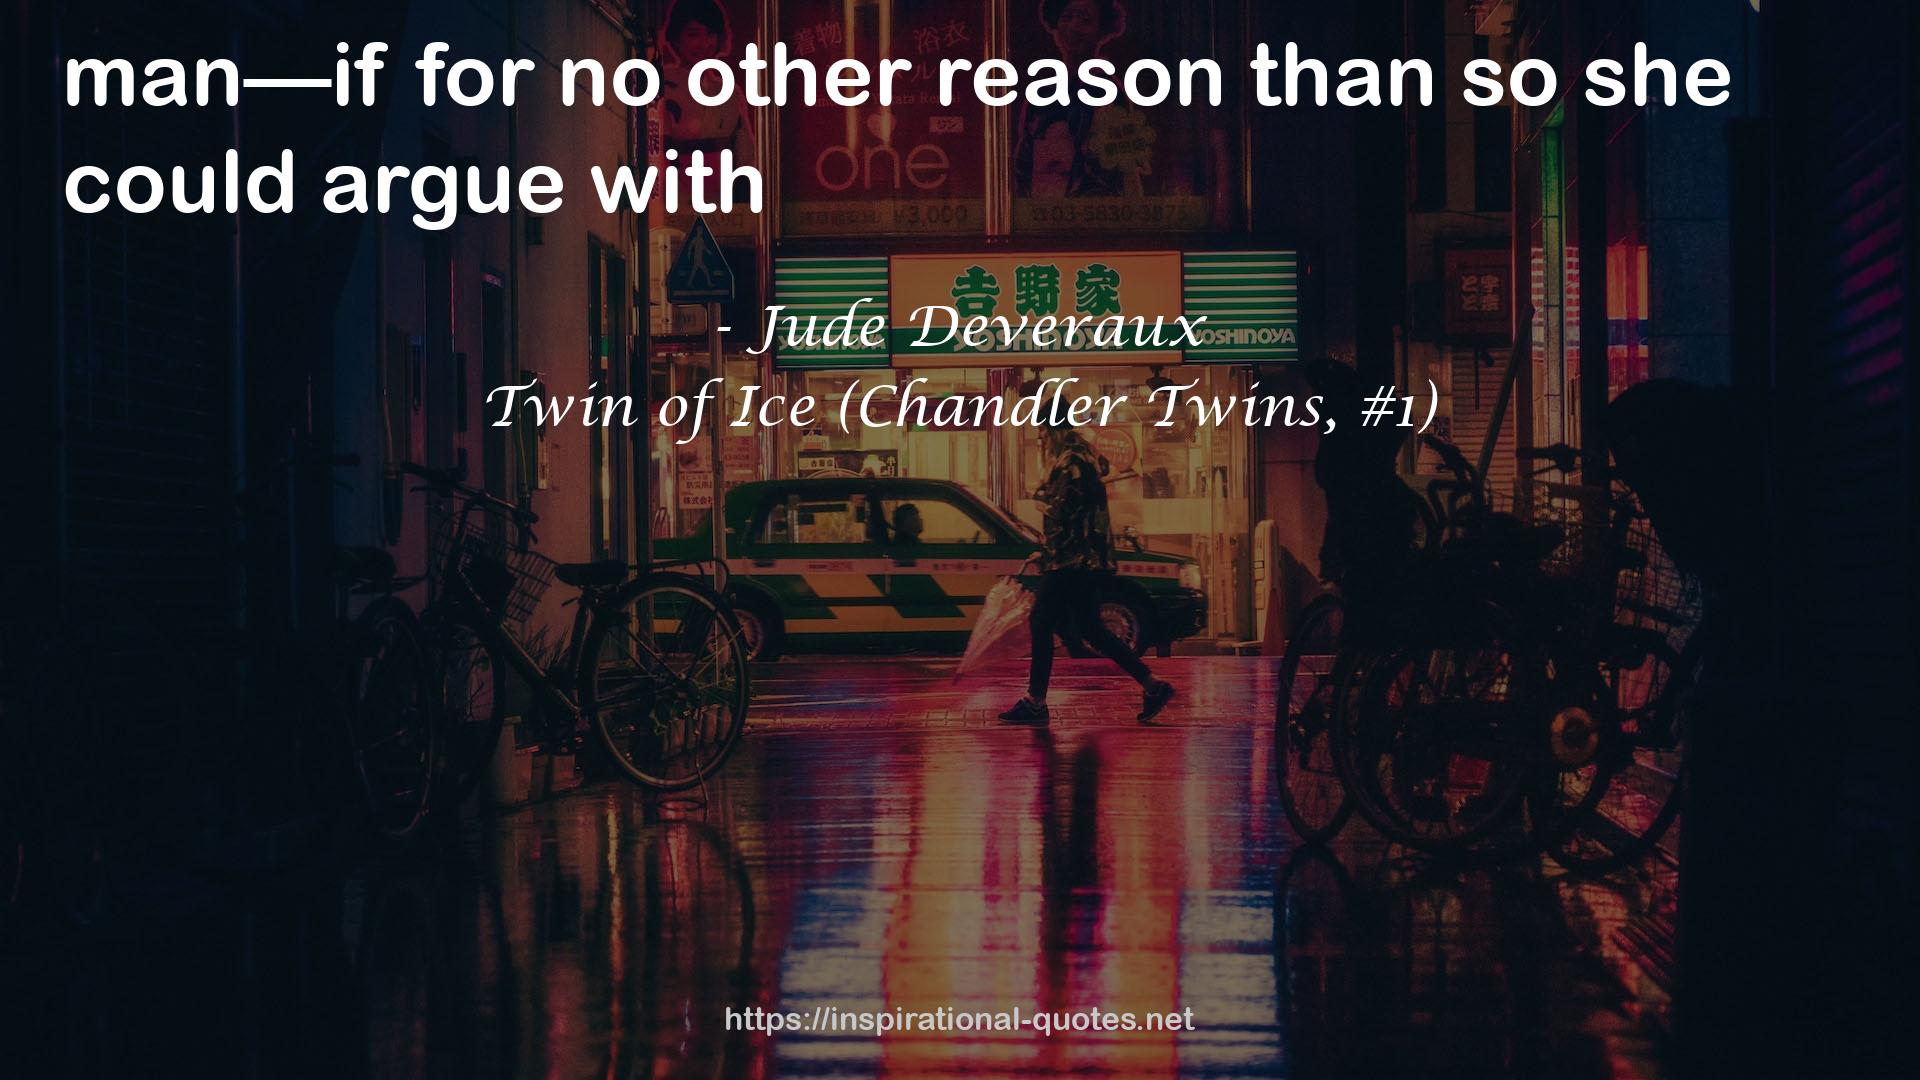 Twin of Ice (Chandler Twins, #1) QUOTES